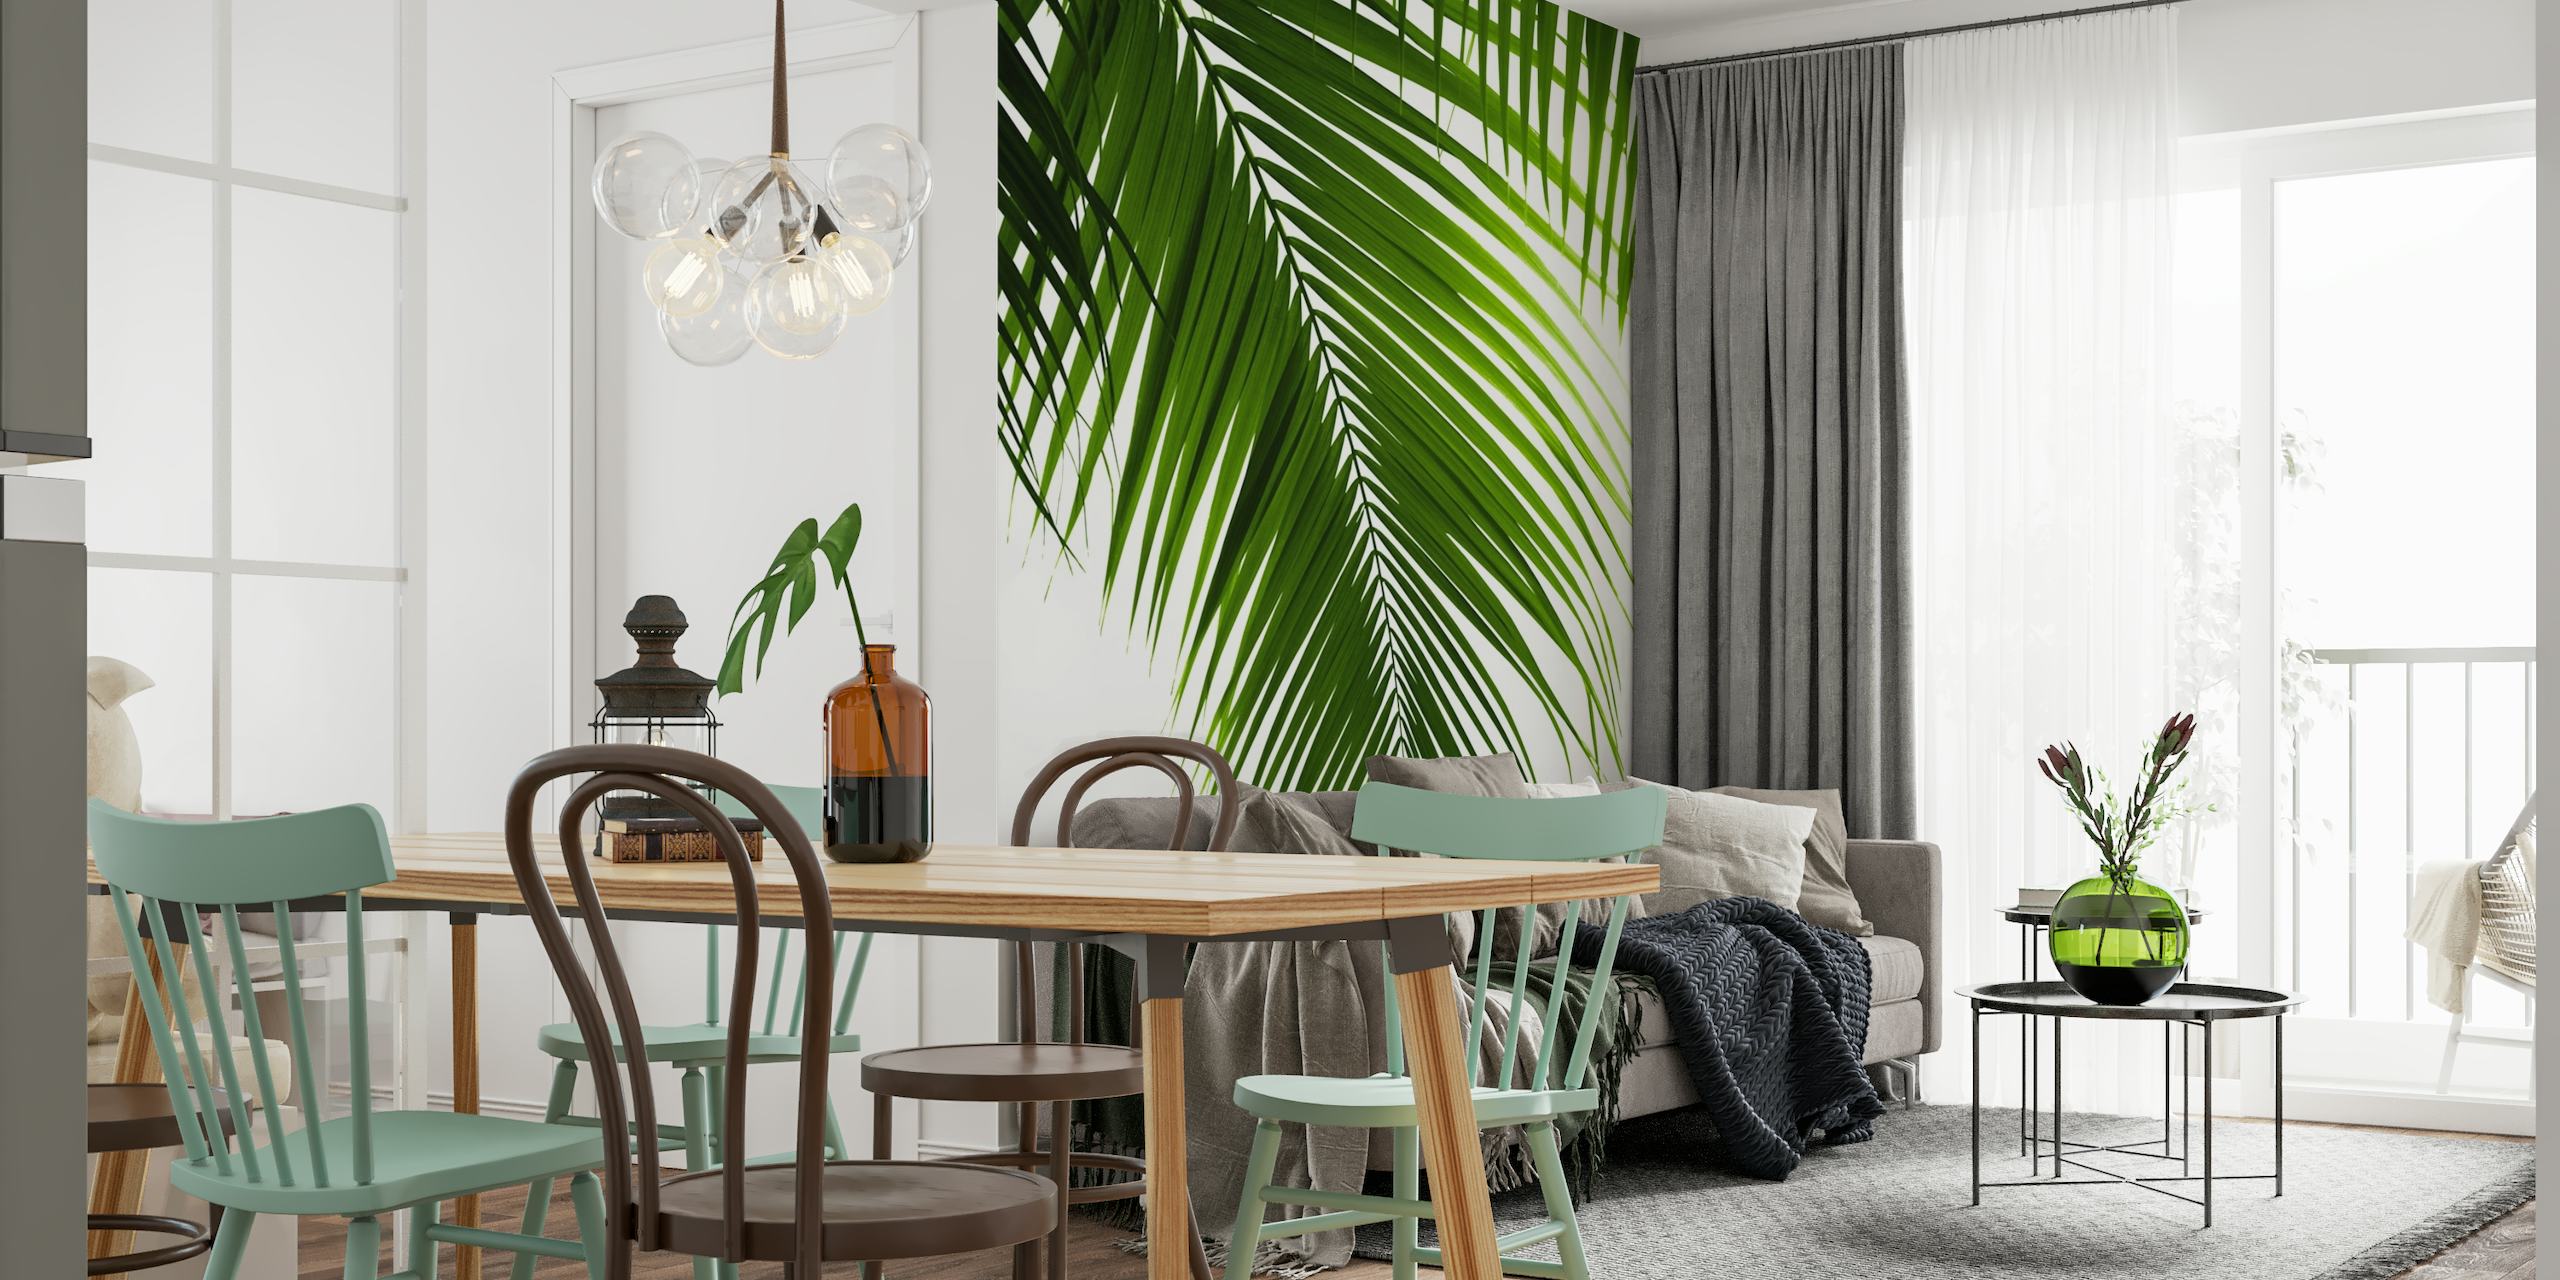 Palm Leaves Green Vibes 10 wallpaper